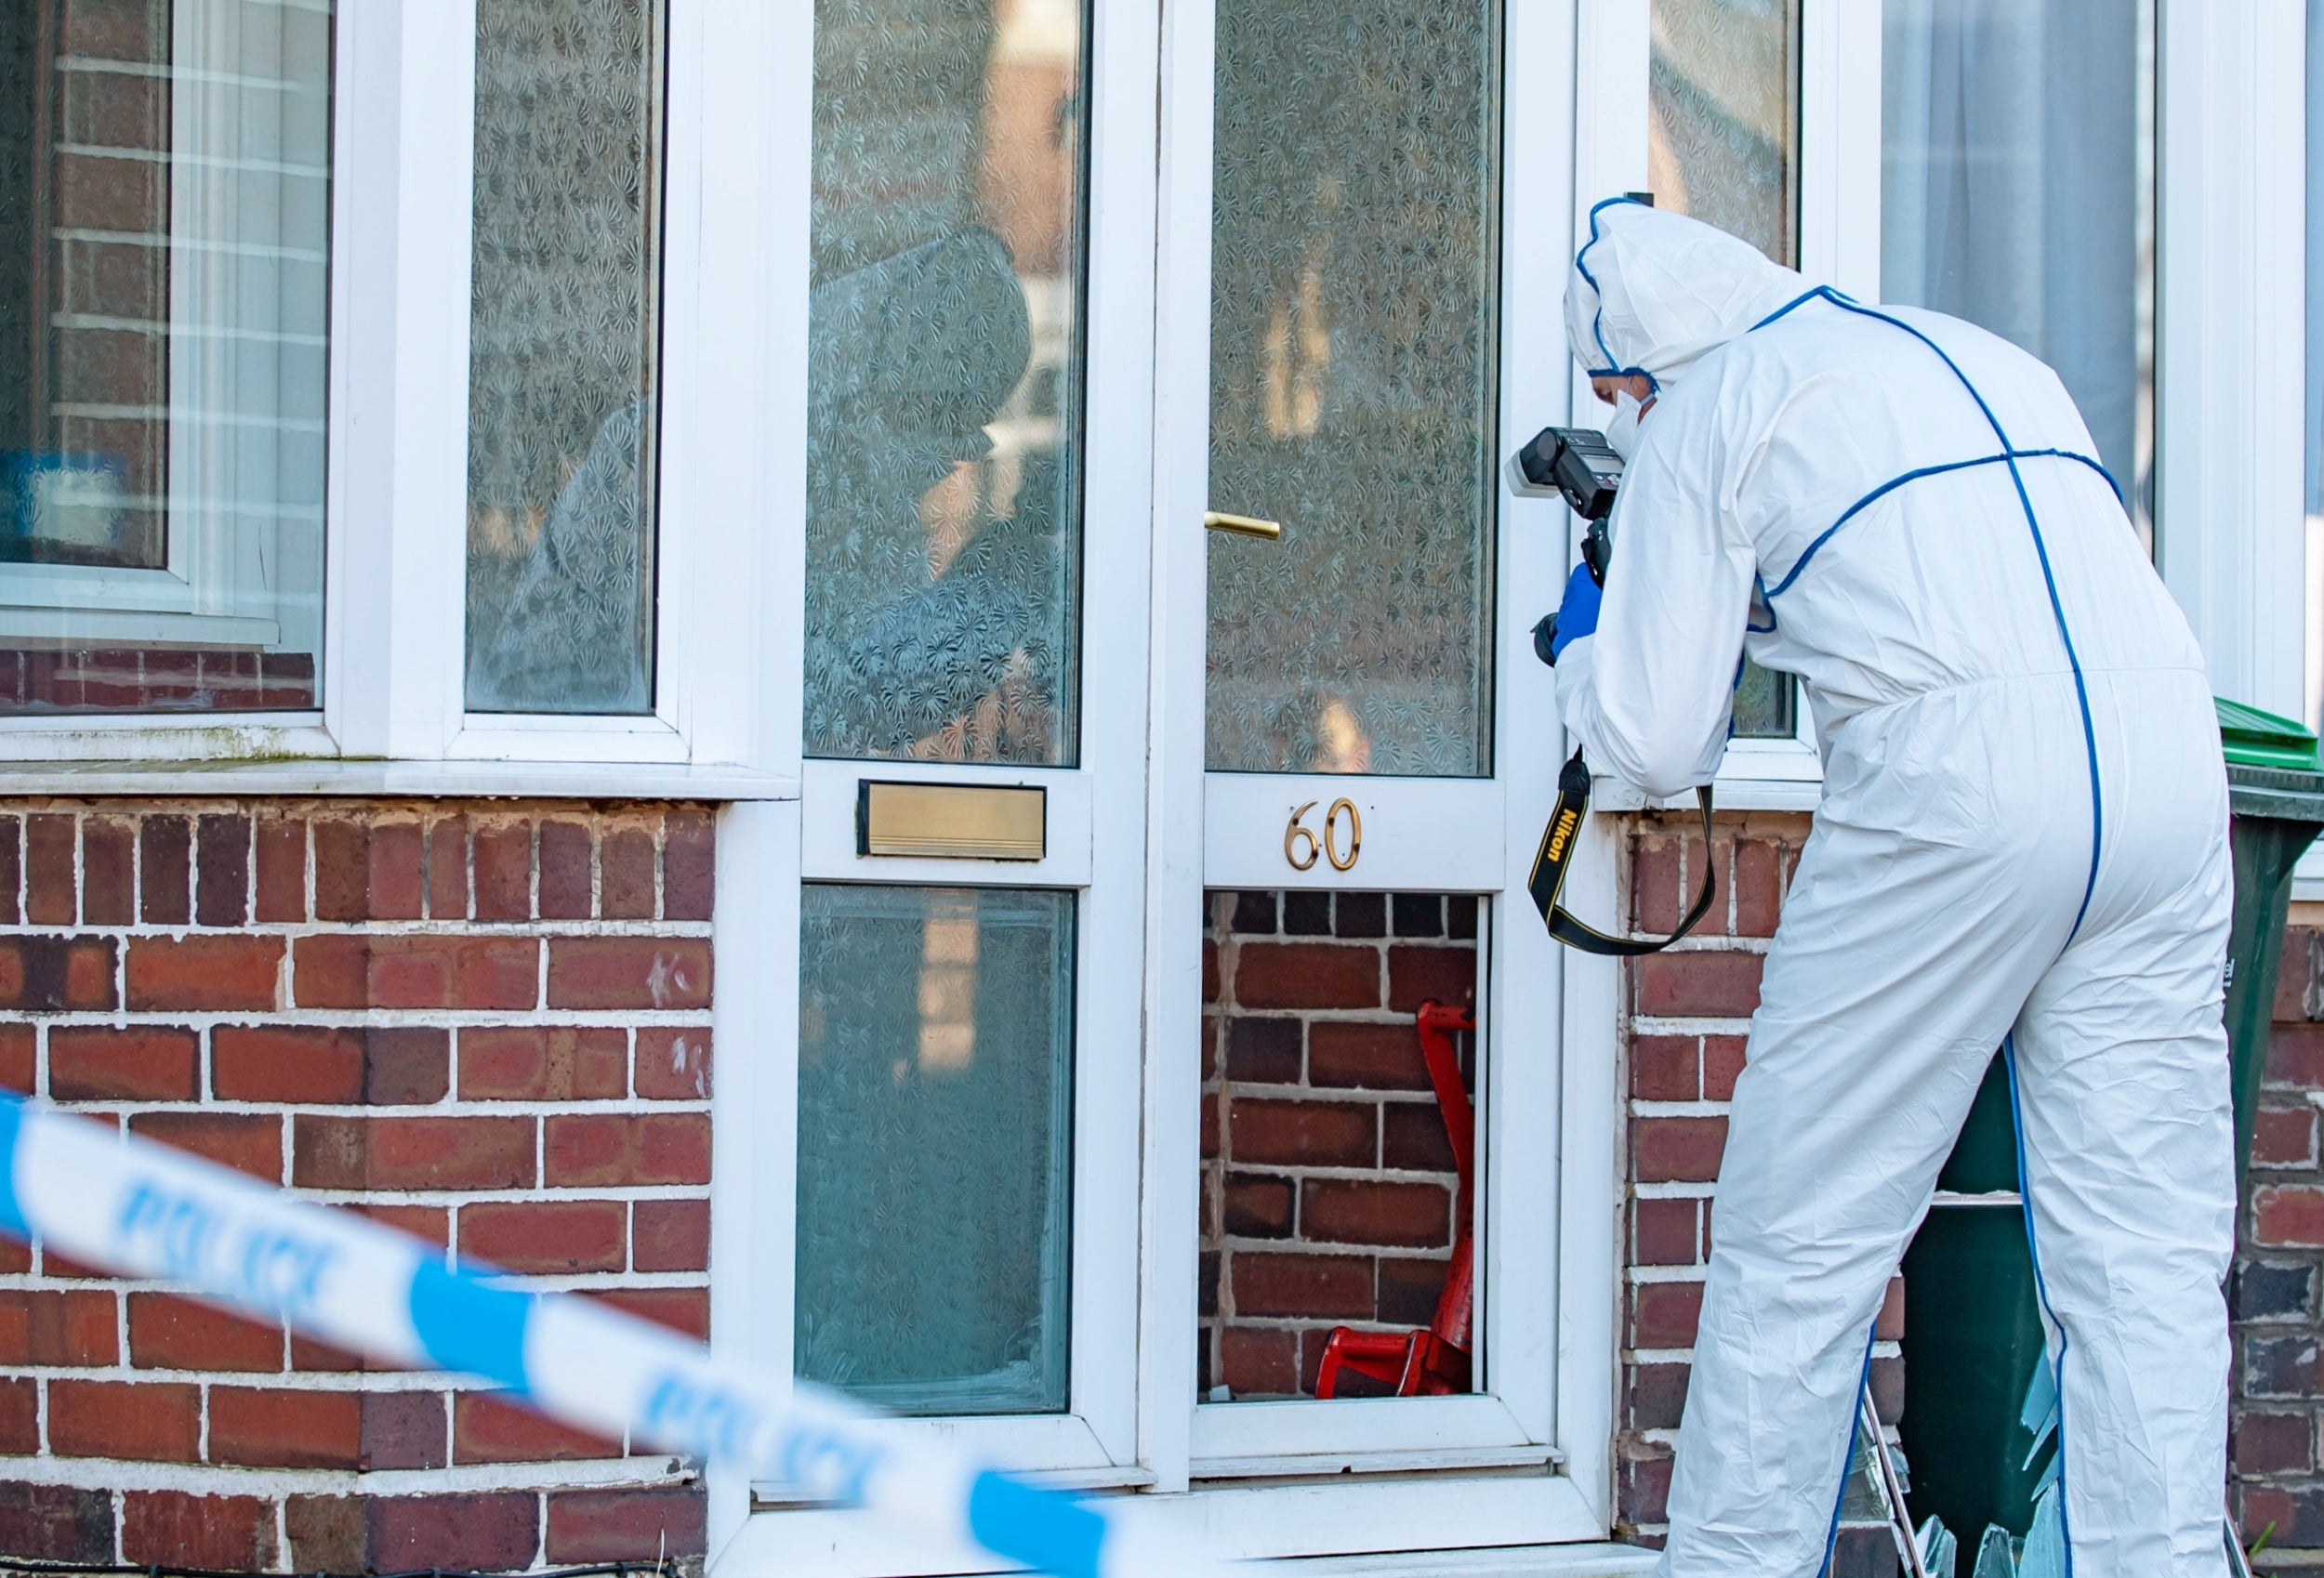 Police forensics at the murder scene in Moat Road, Oldbury